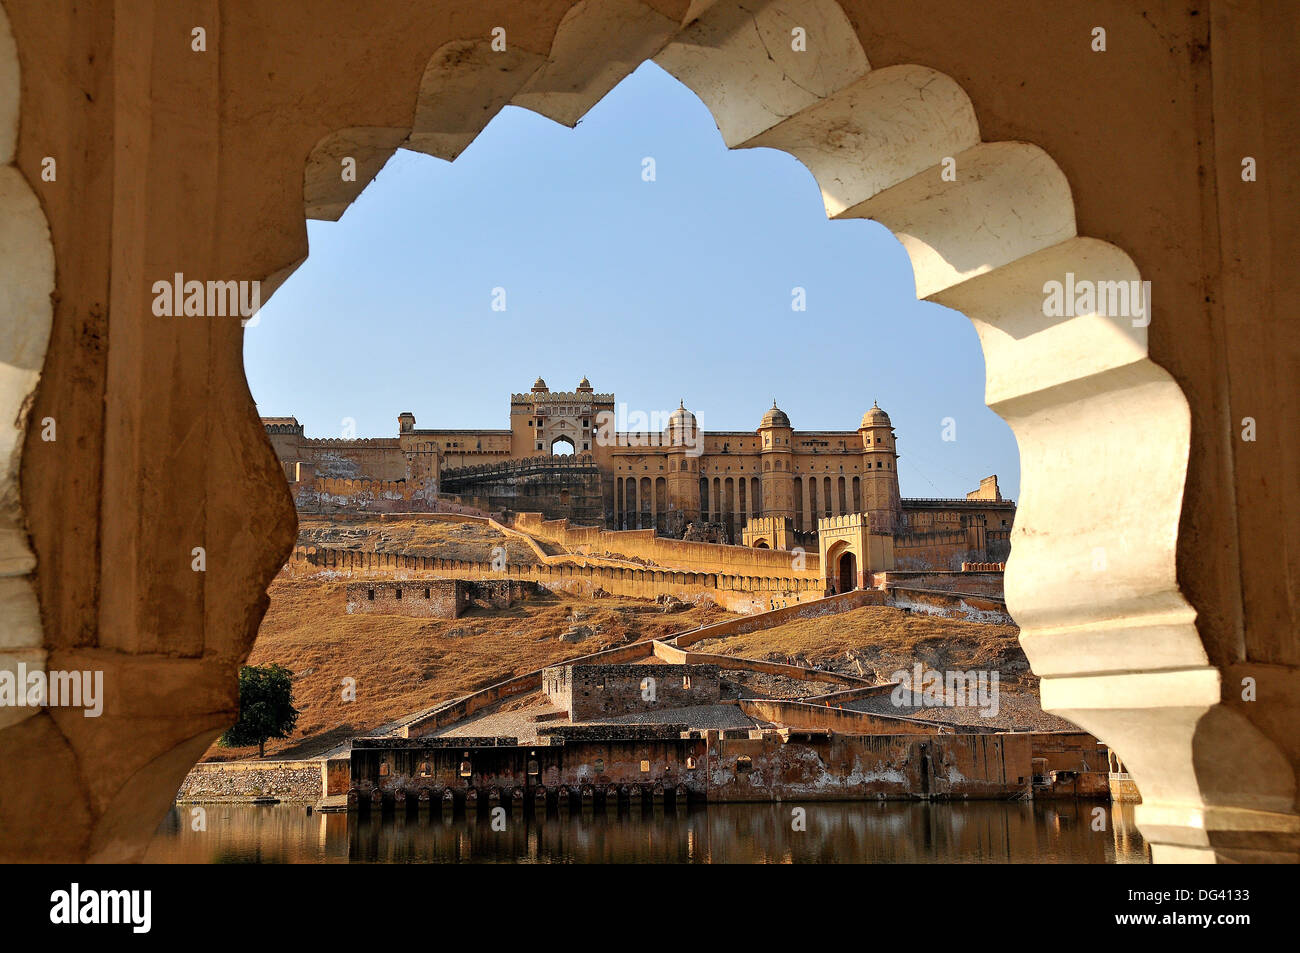 Amber Fort dating from the 16th century, near Jaipur, Rajasthan, India, Asia Stock Photo